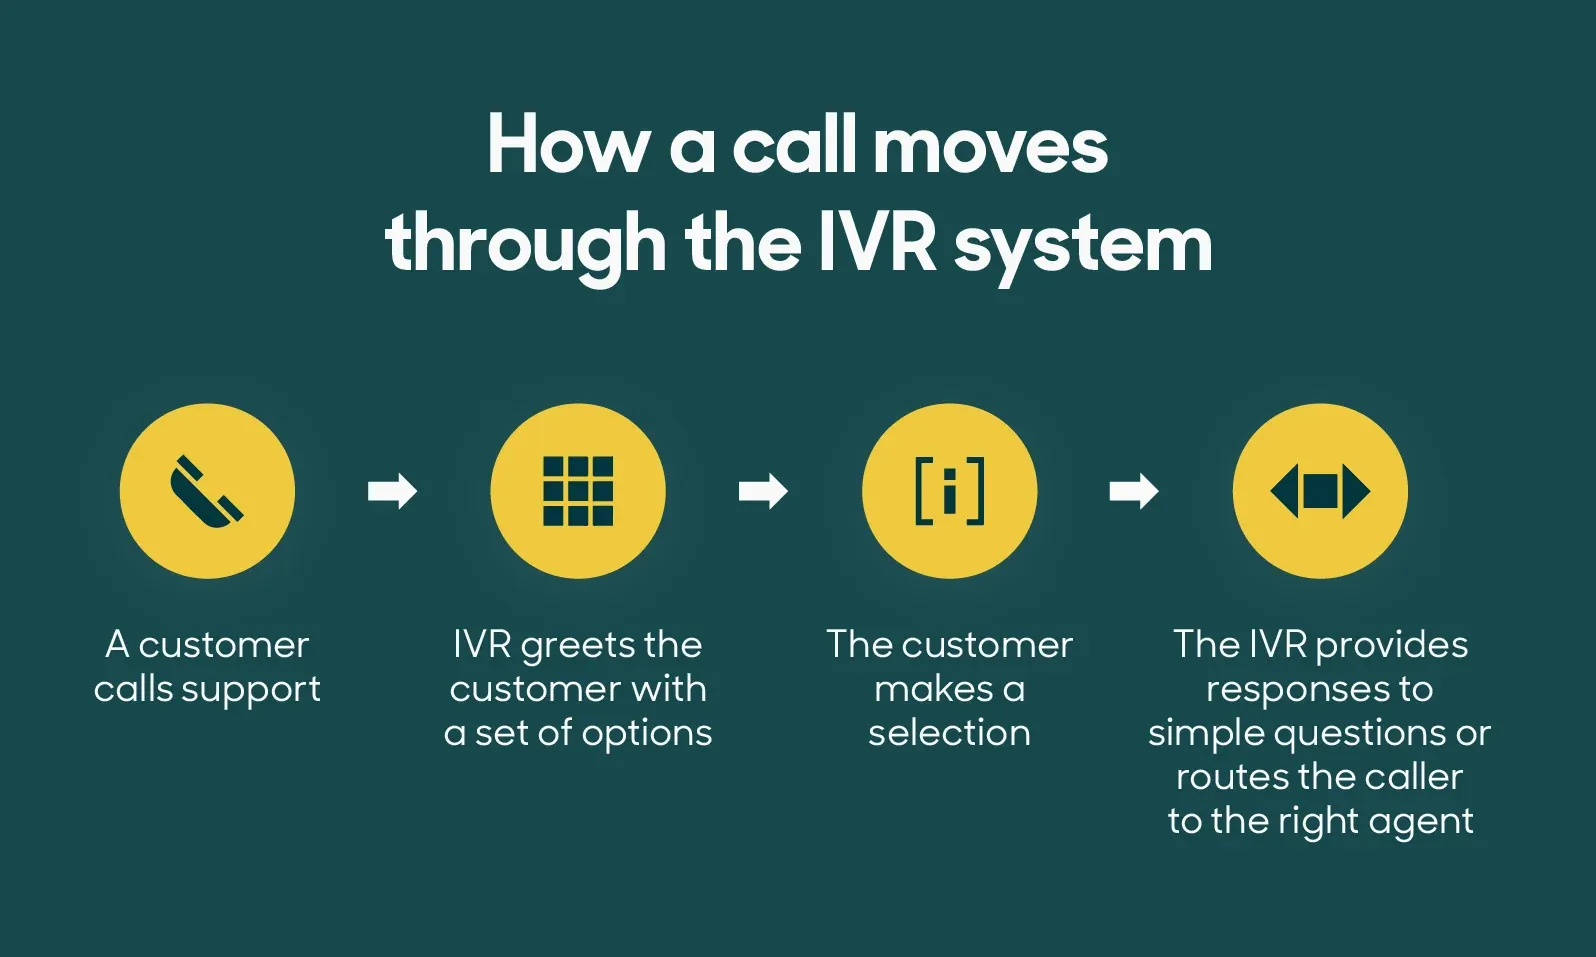 How Does Interactive Voice Response (IVR) Work?